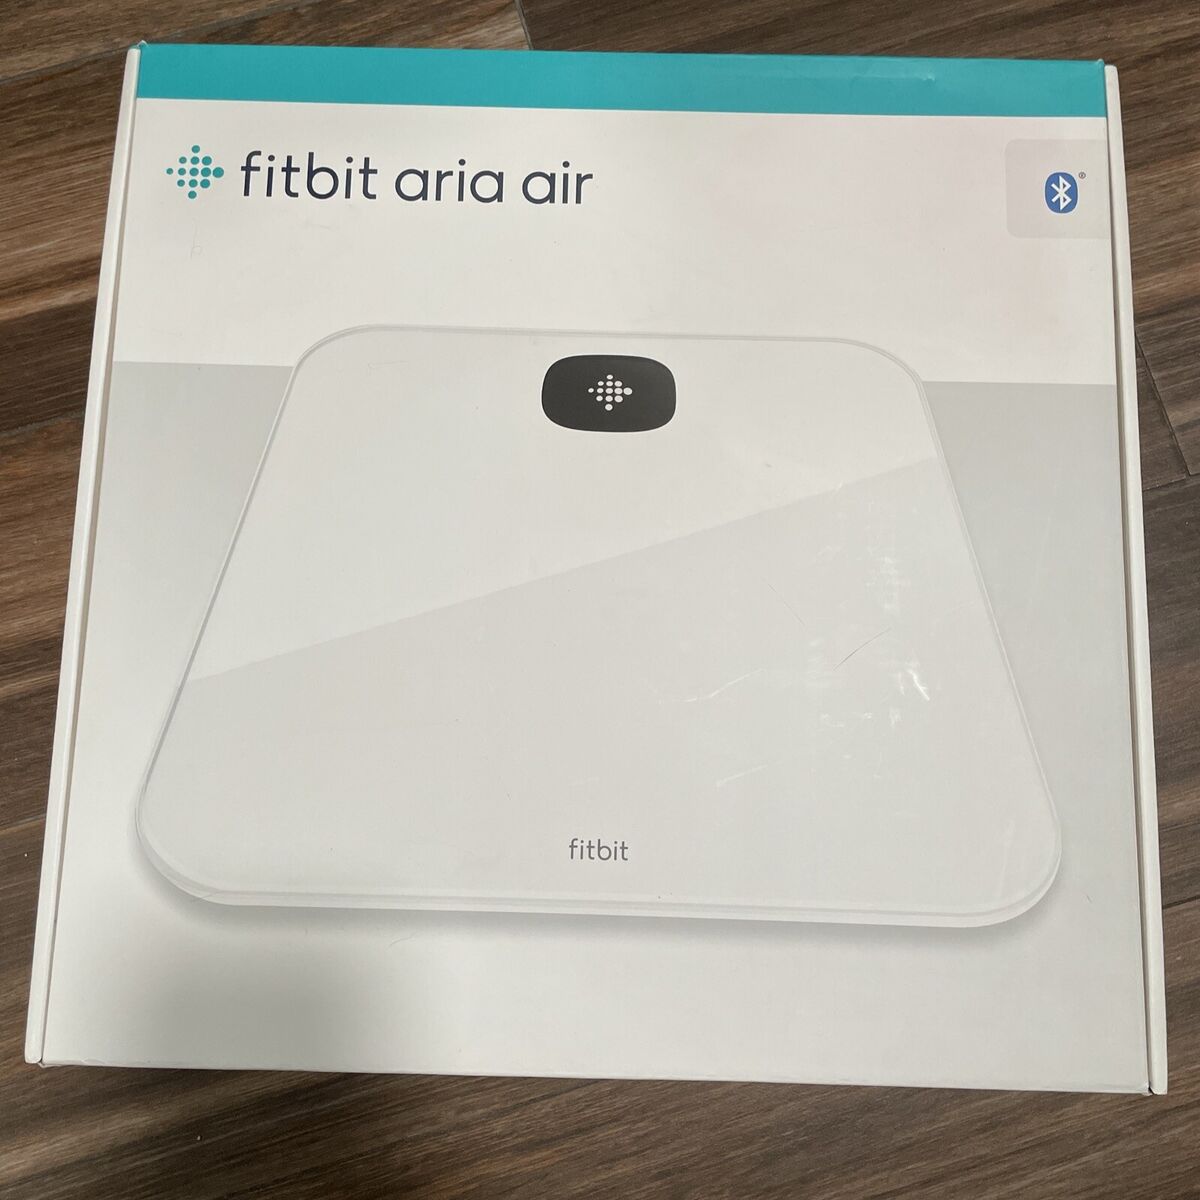 Fitbit Aria Air Bluetooth Digital Body Weight and BMI Smart Scale